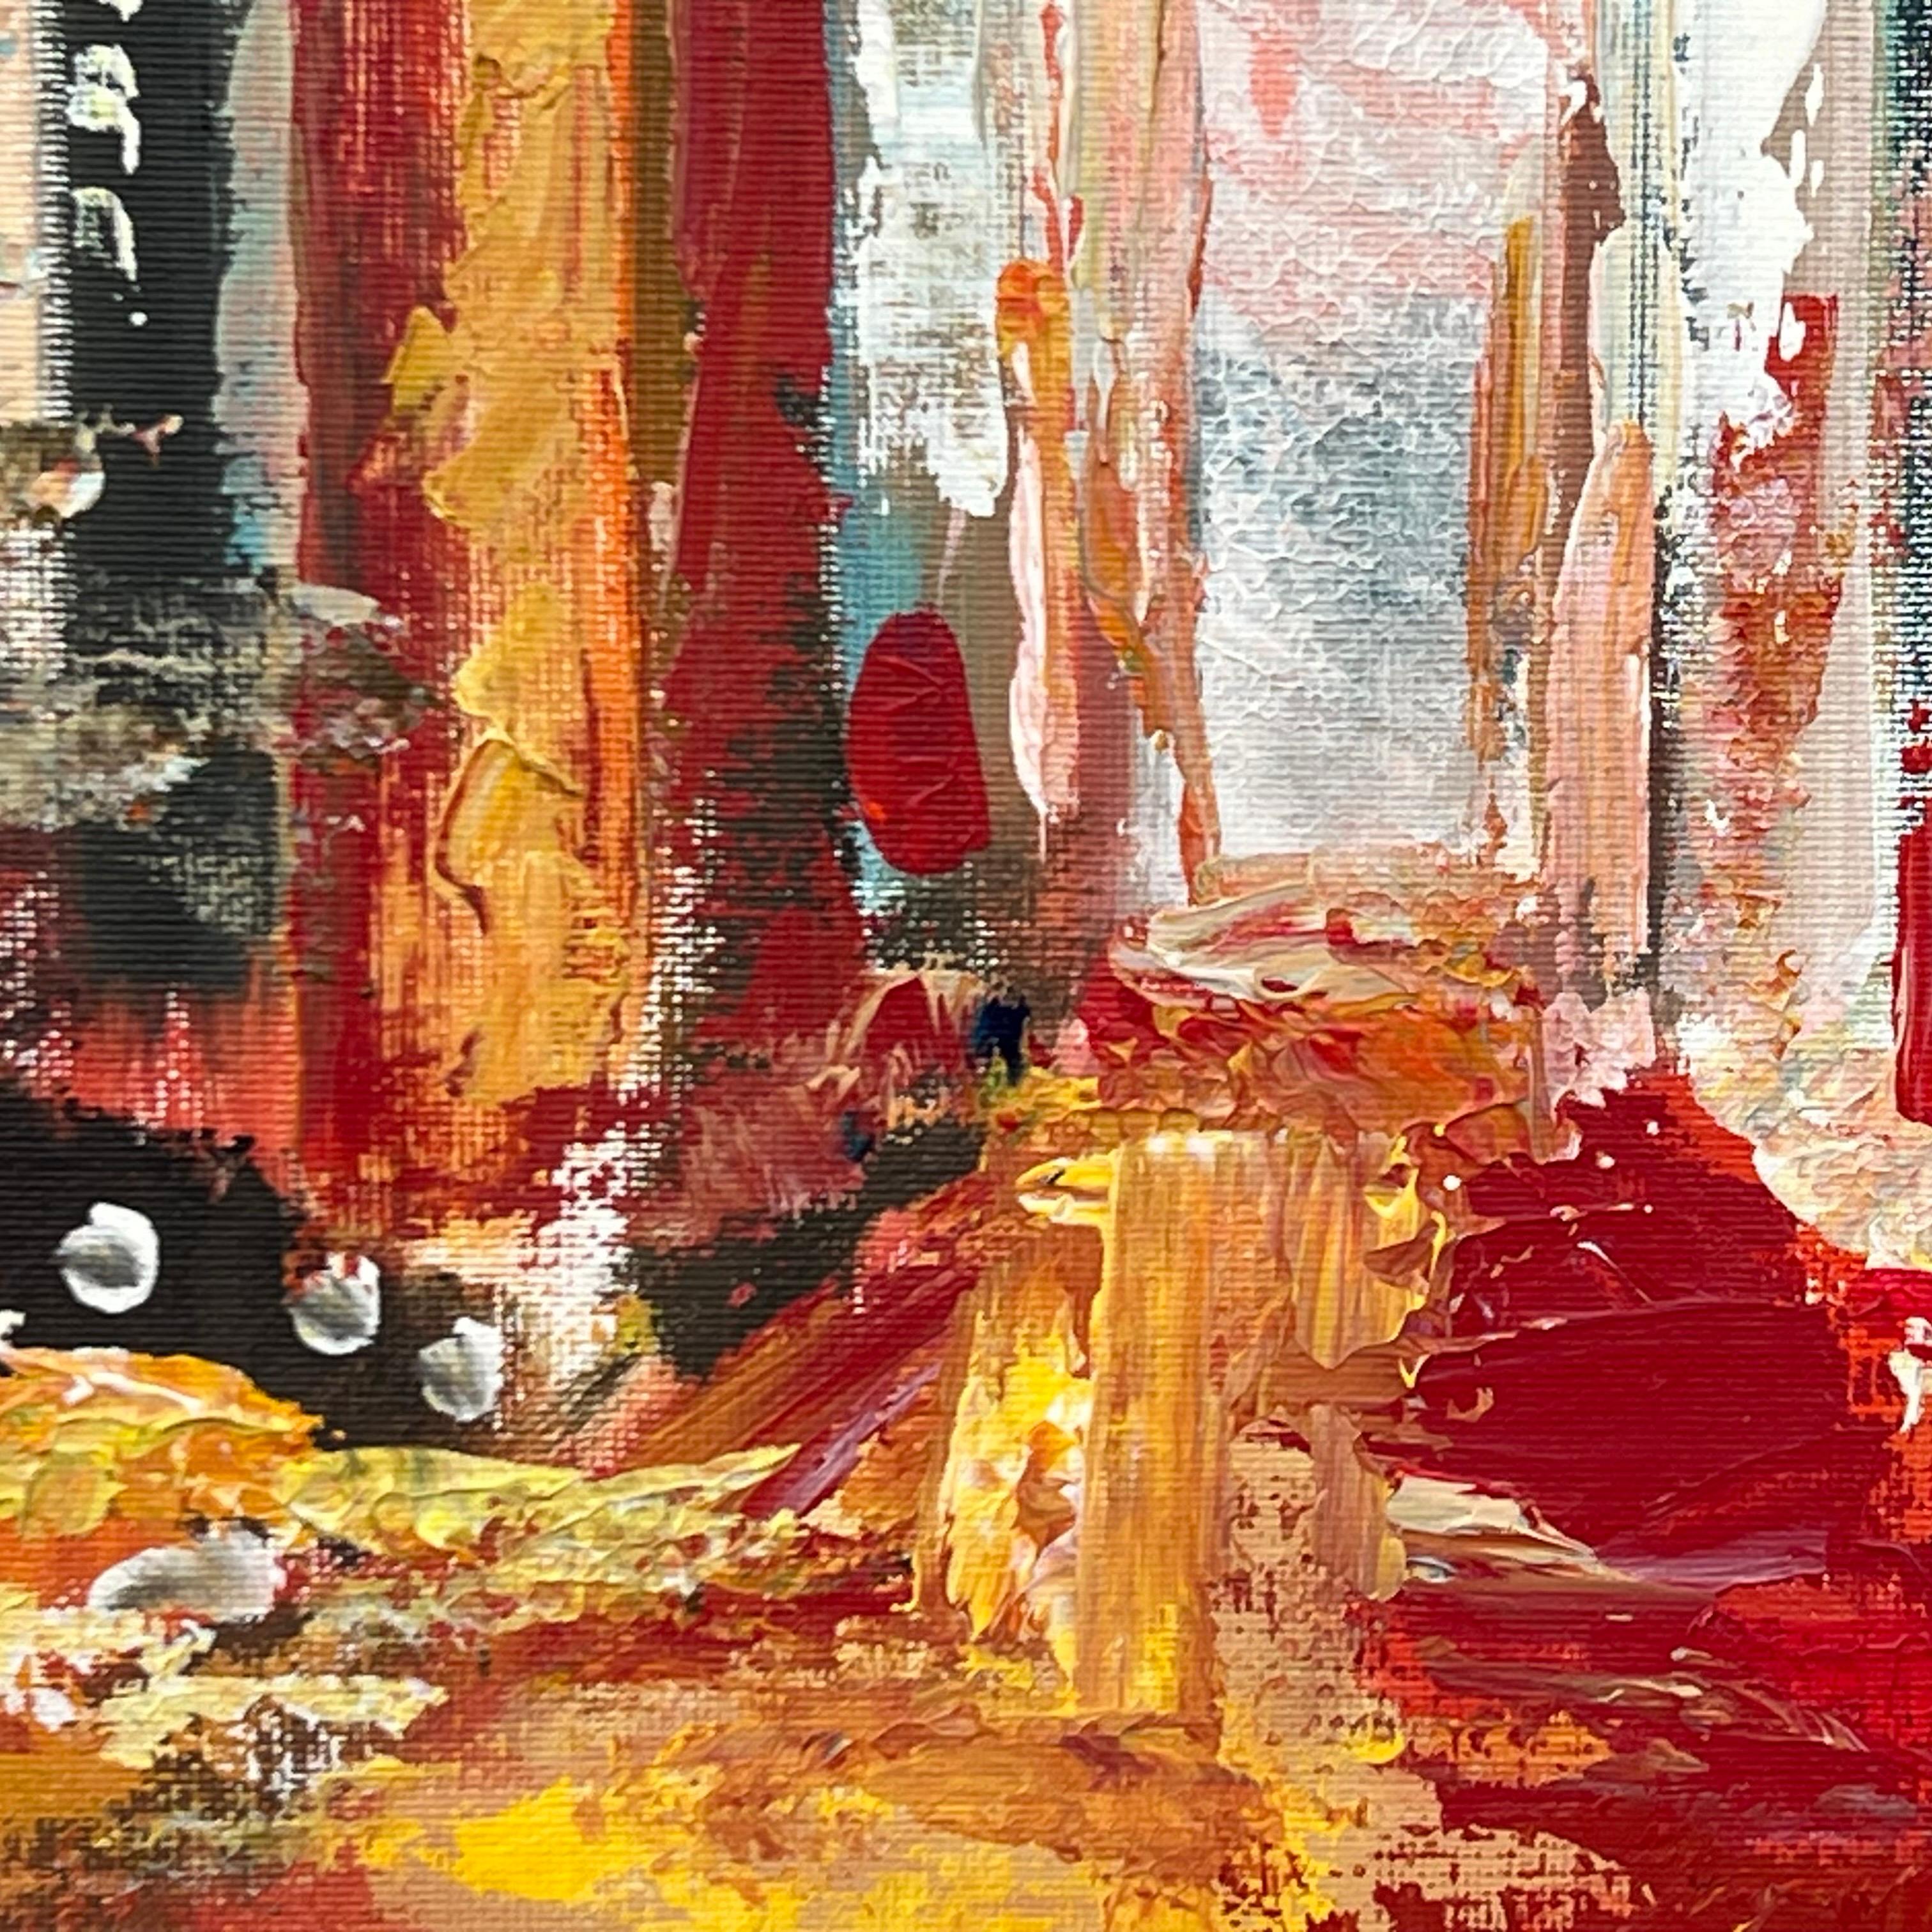 Colourful Red Impasto Abstract Interpretation of New York City by British Artist For Sale 6